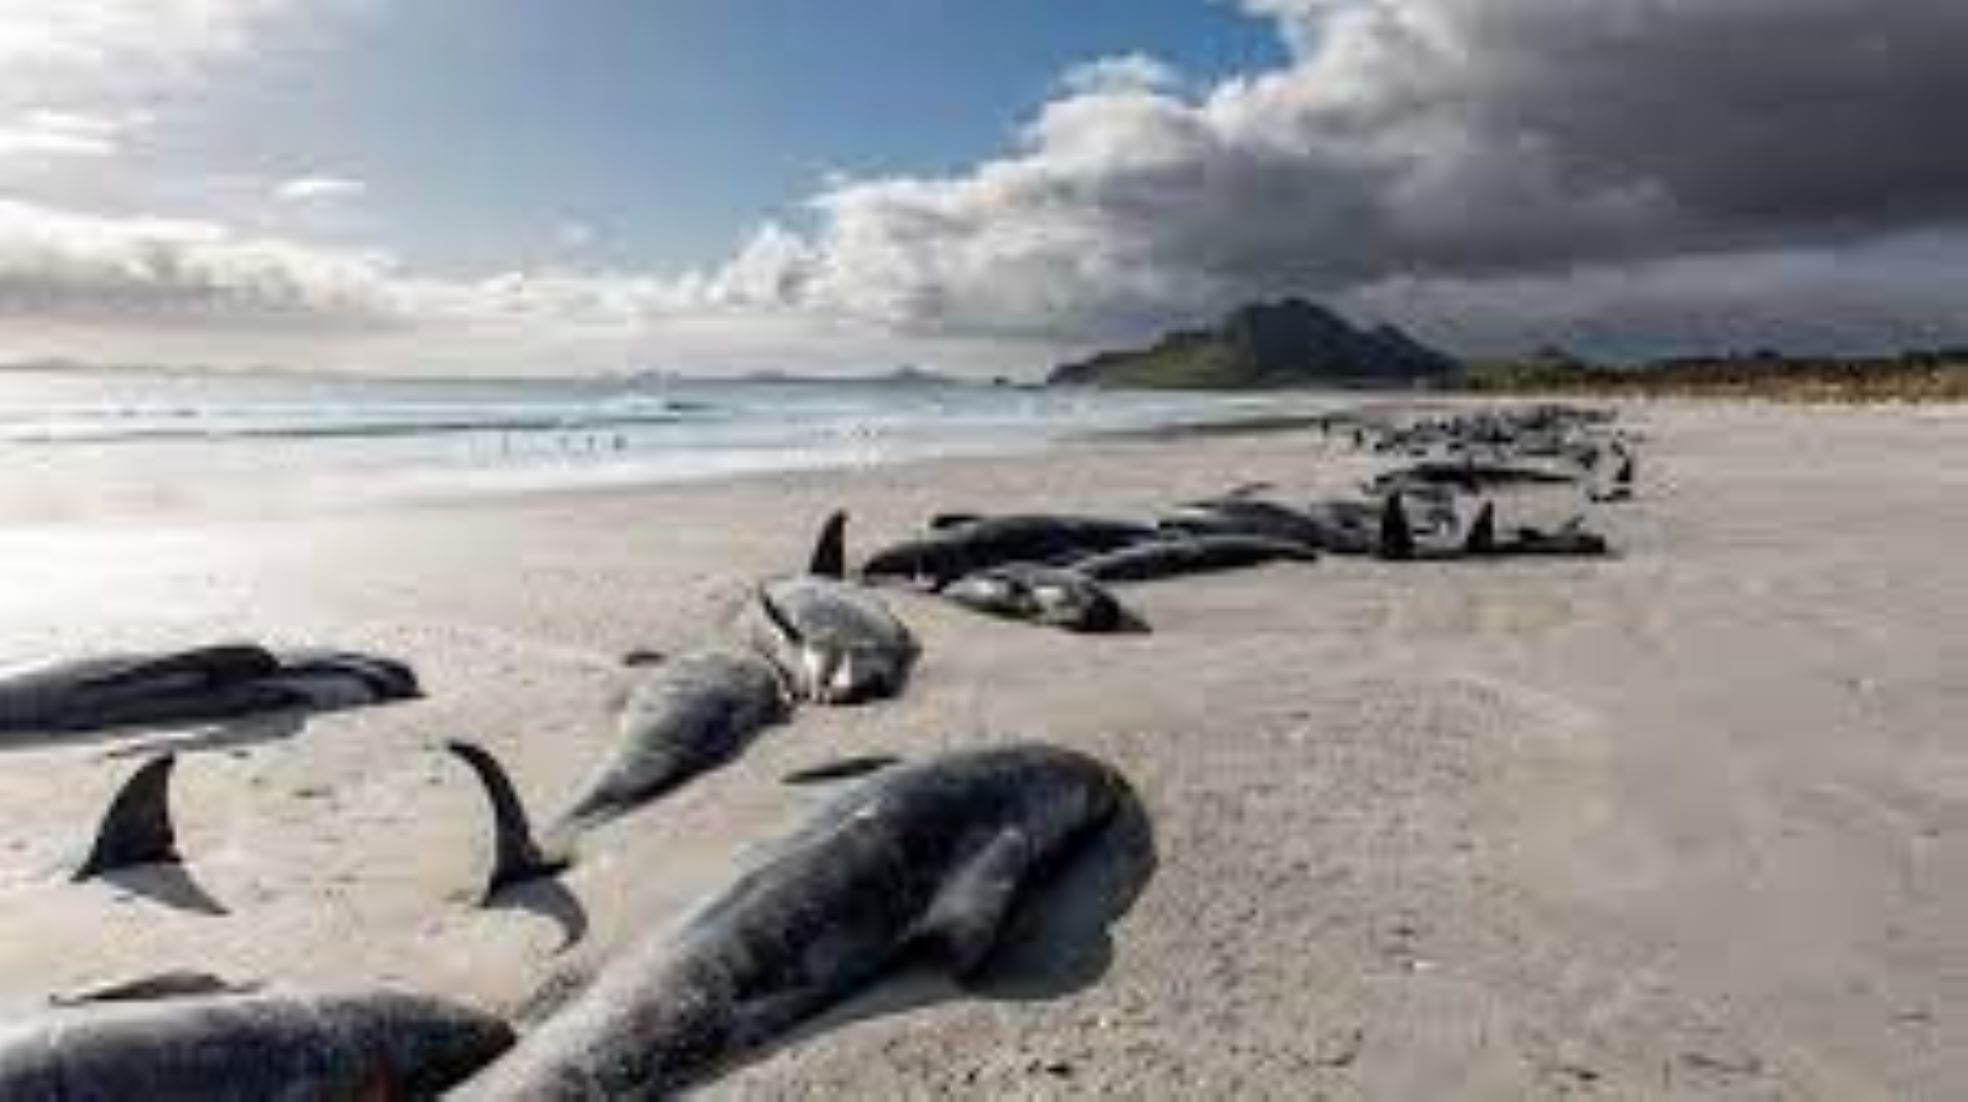 New Zealand’s Coastal Marine Heatwaves Grow Longer, Stronger, More Frequent: Research